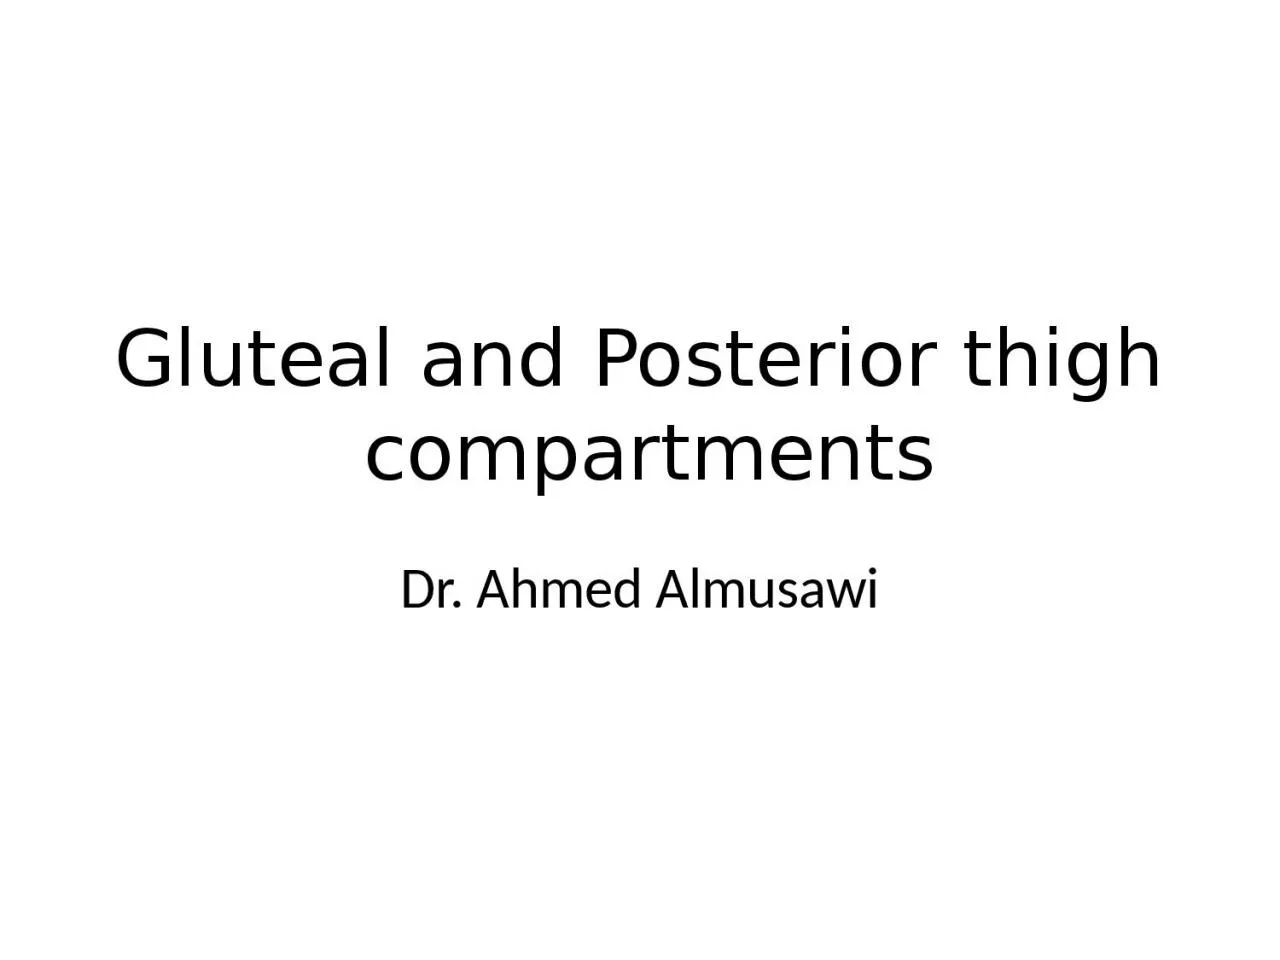 Gluteal and Posterior thigh compartments